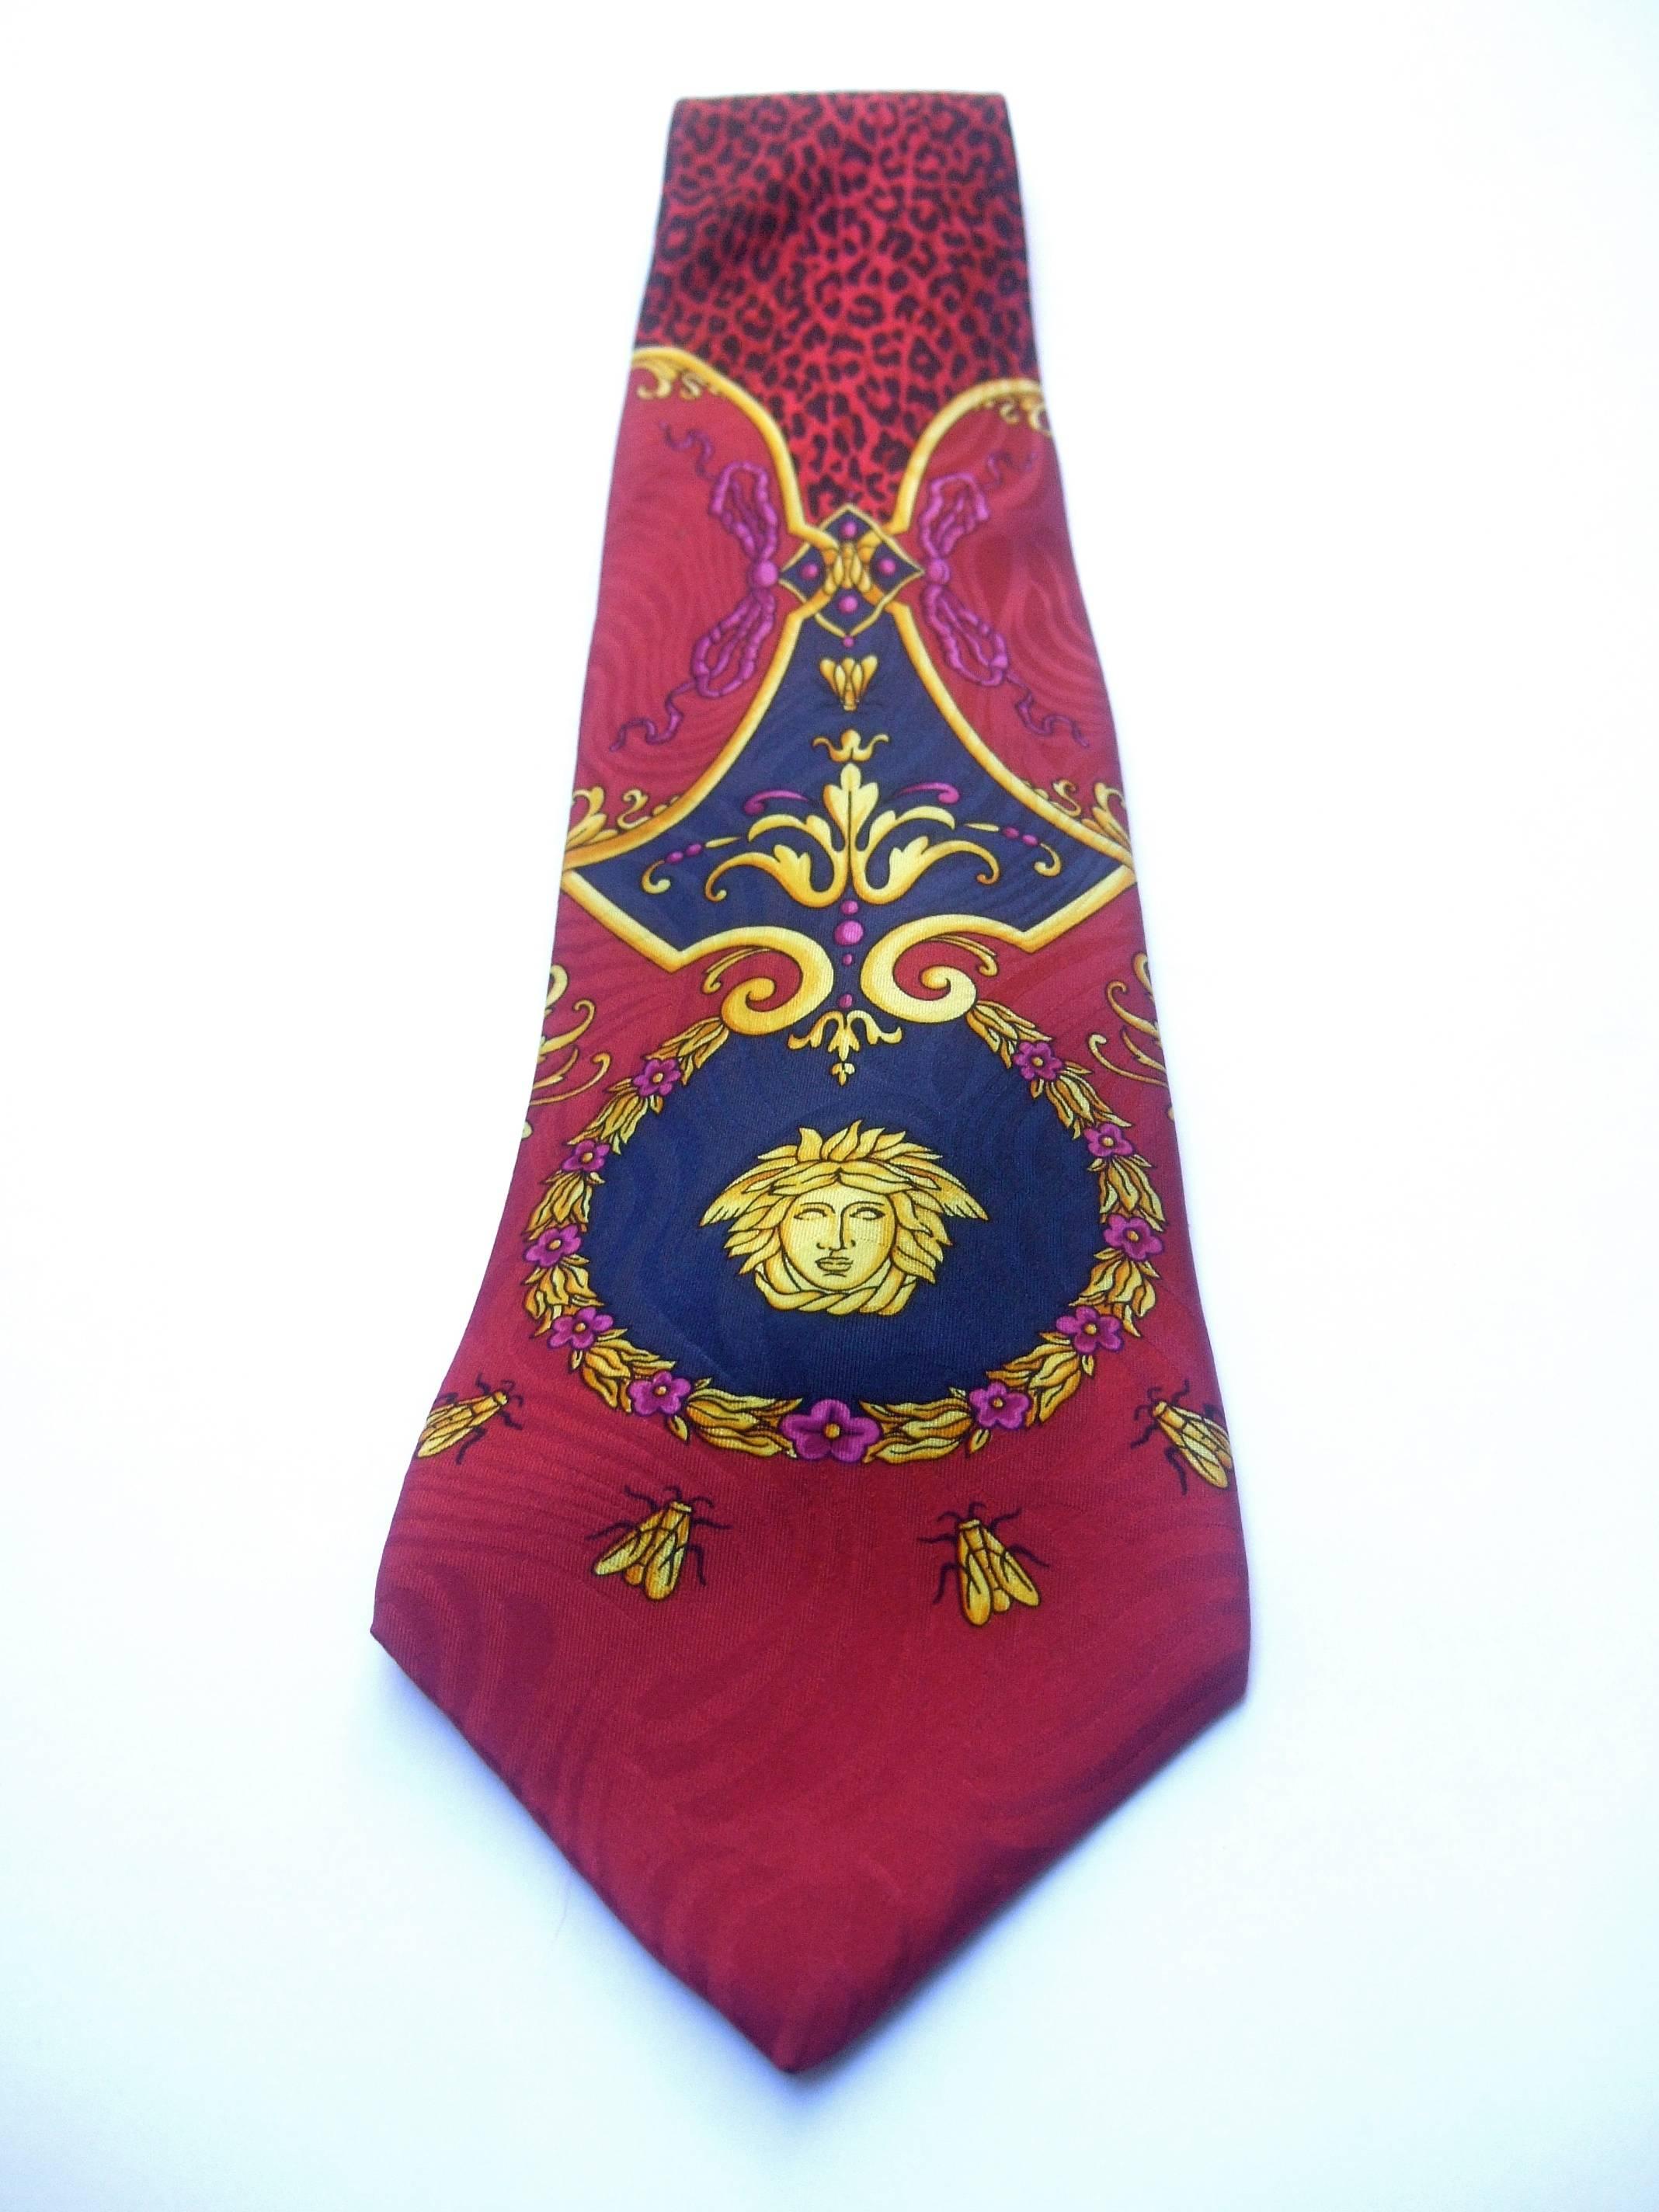 Gianni Versace Silk medusa animal jungle print necktie c 1990s 
The vibrant burgundy silk necktie is designed  
with Versace's signature medusa figure

Accented with a series of golden bees circling the medusa 
figure; swarming around a wreath of